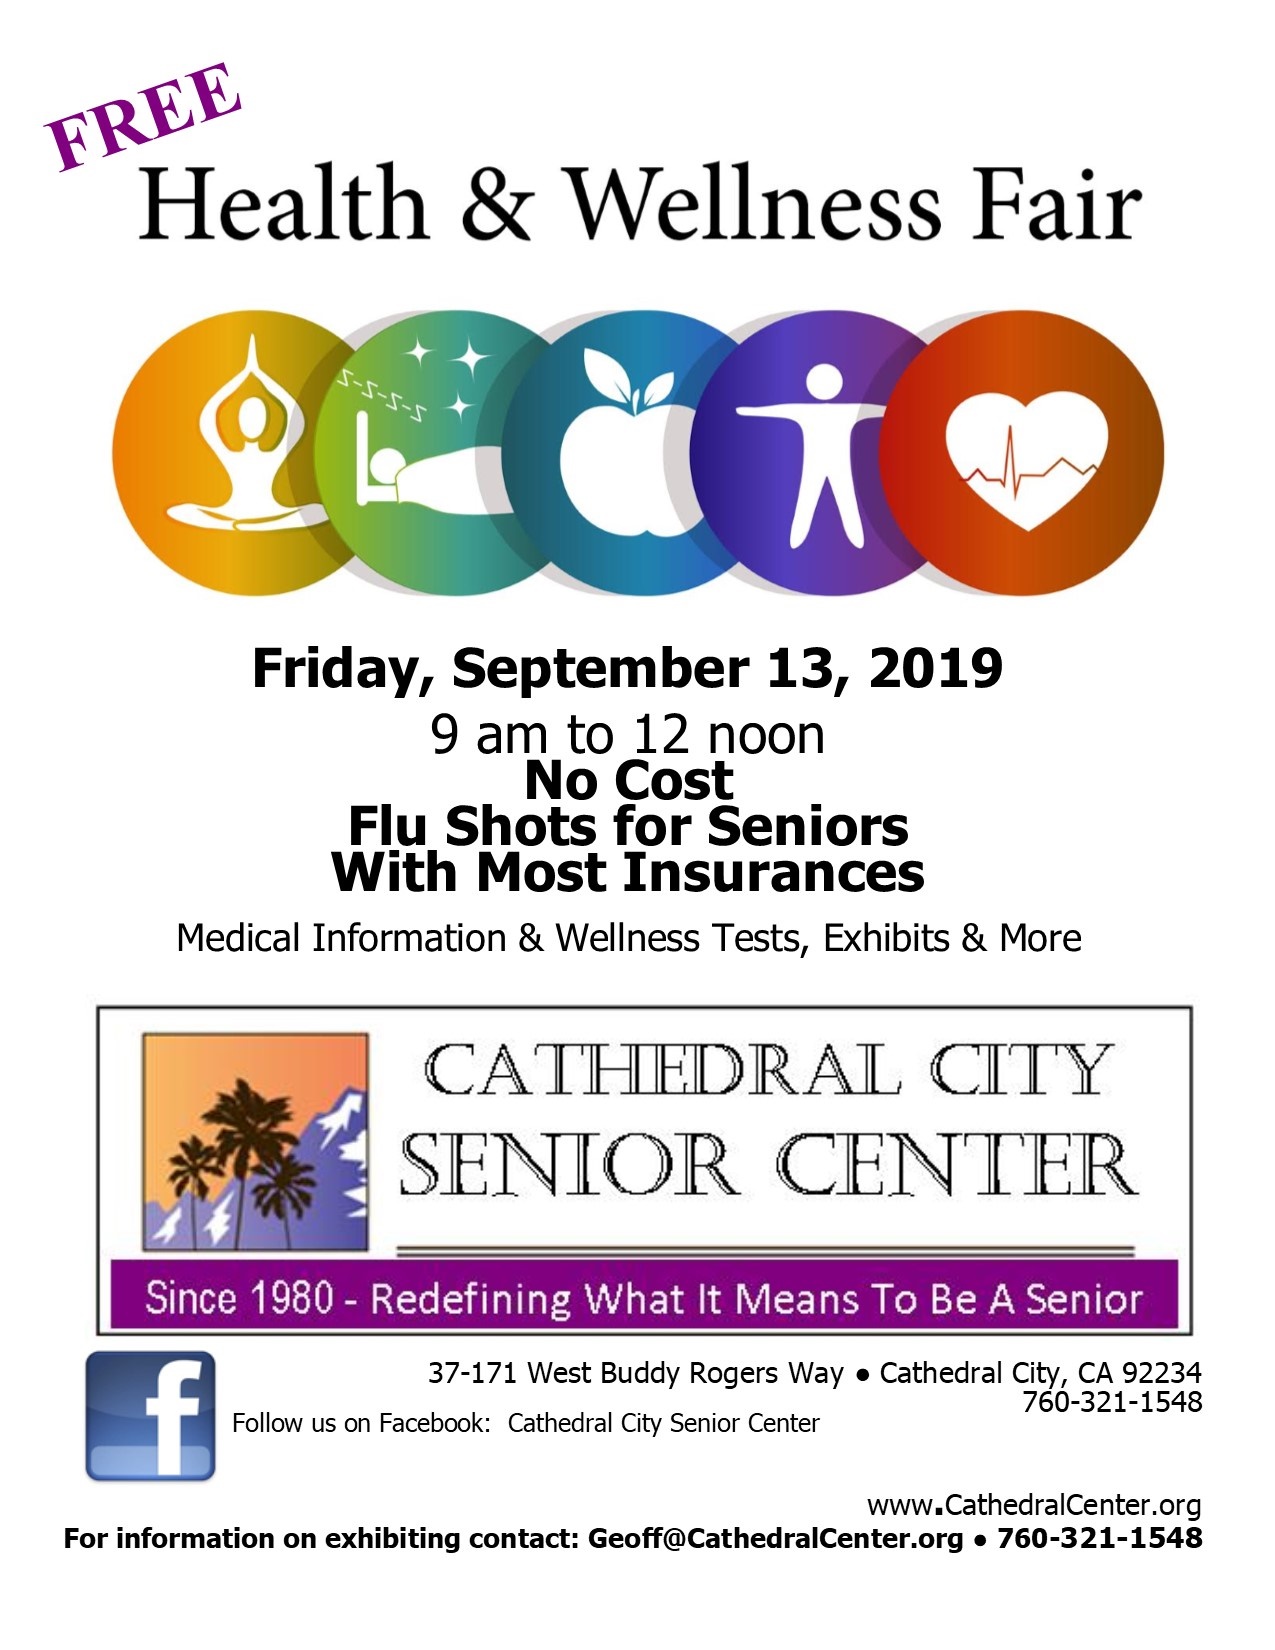 cathedral-city-senior-center-hosts-a-health-wellness-fair-discover-cathedral-city